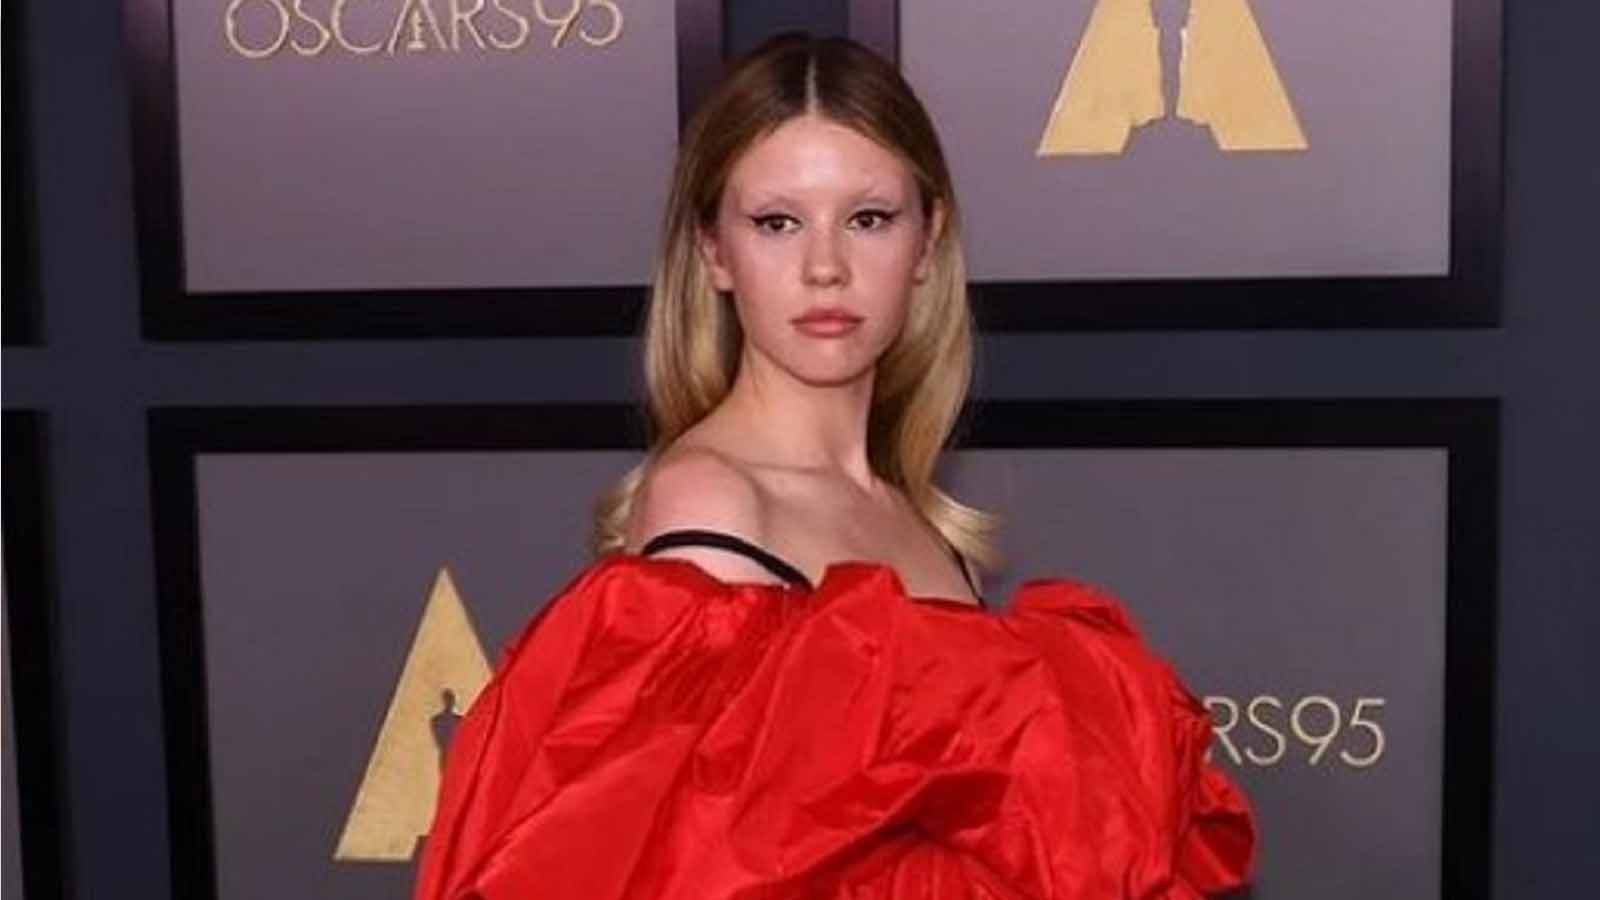 Mia Goth Sister: Does She Have Any Siblings? Family